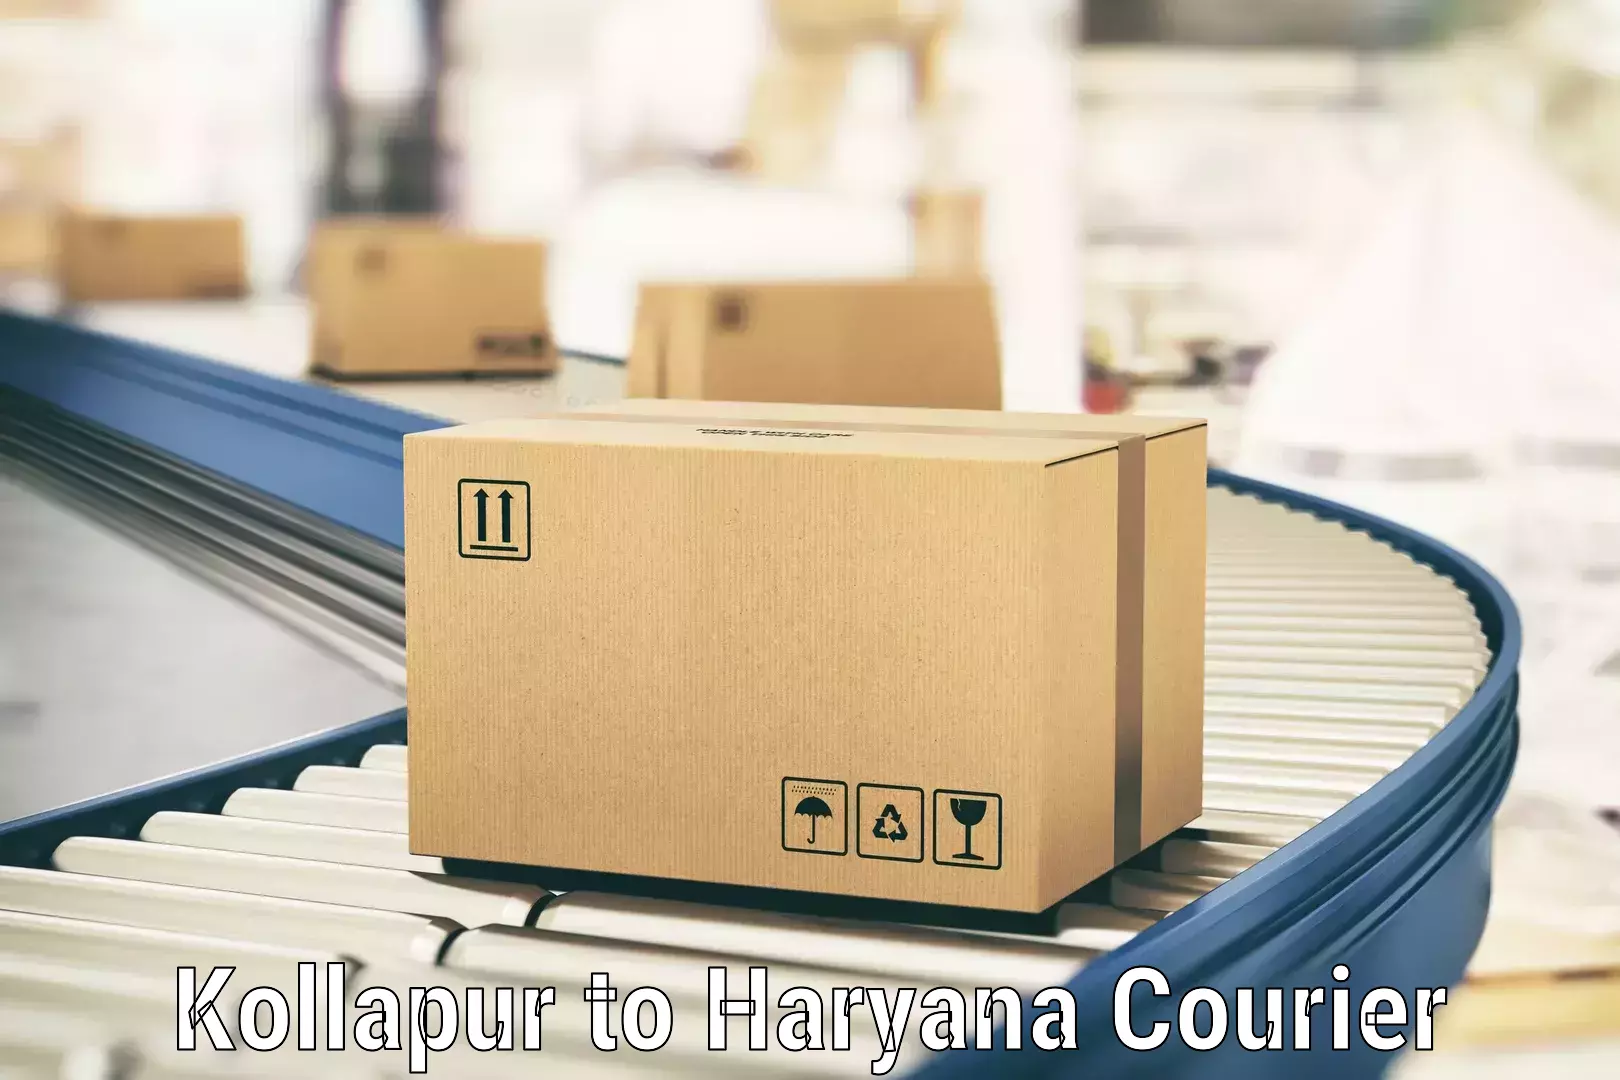 Online courier booking Kollapur to NCR Haryana